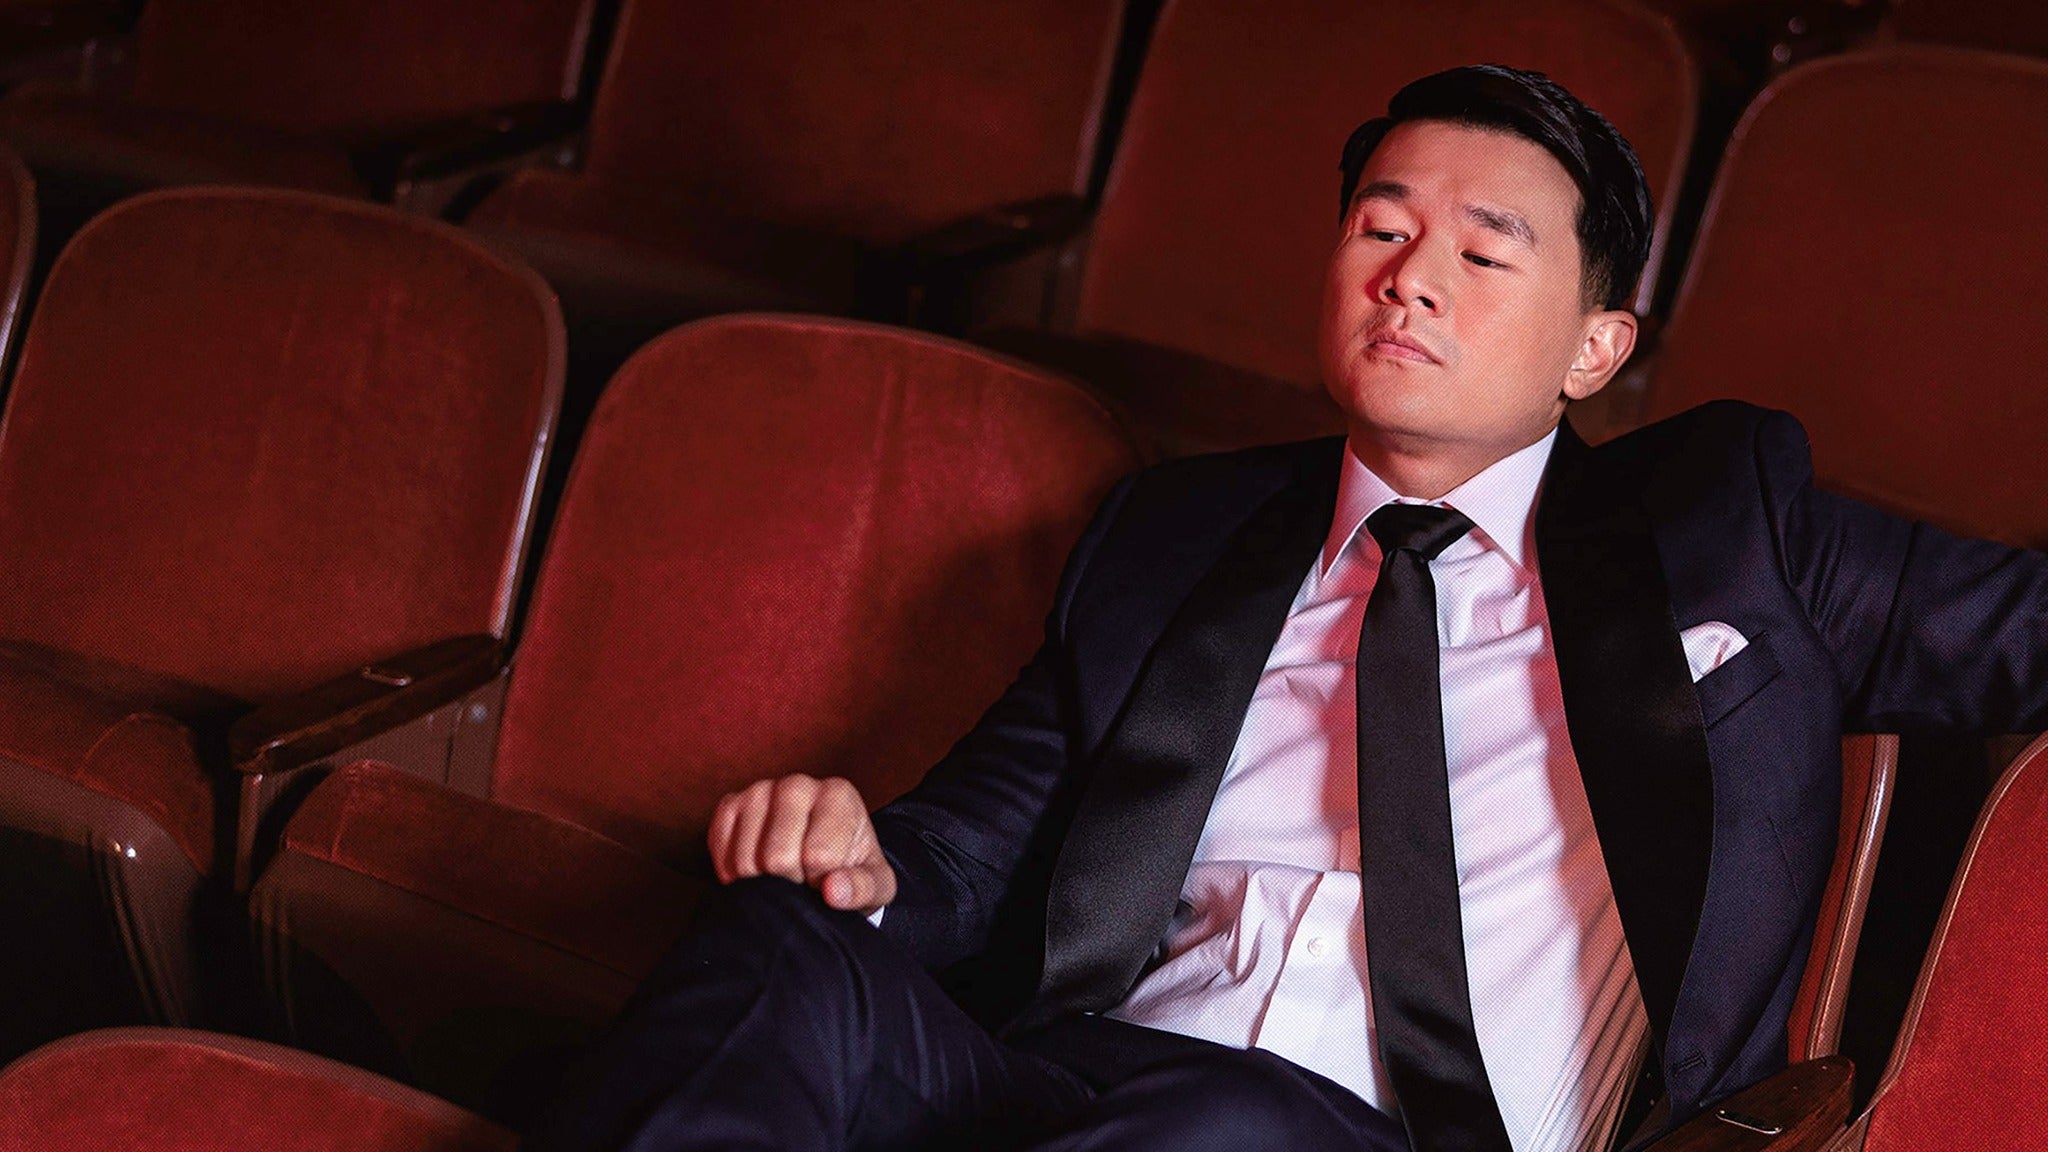 Ronny Chieng: The Hope You Get Rich Tour in Dallas promo photo for Artist presale offer code